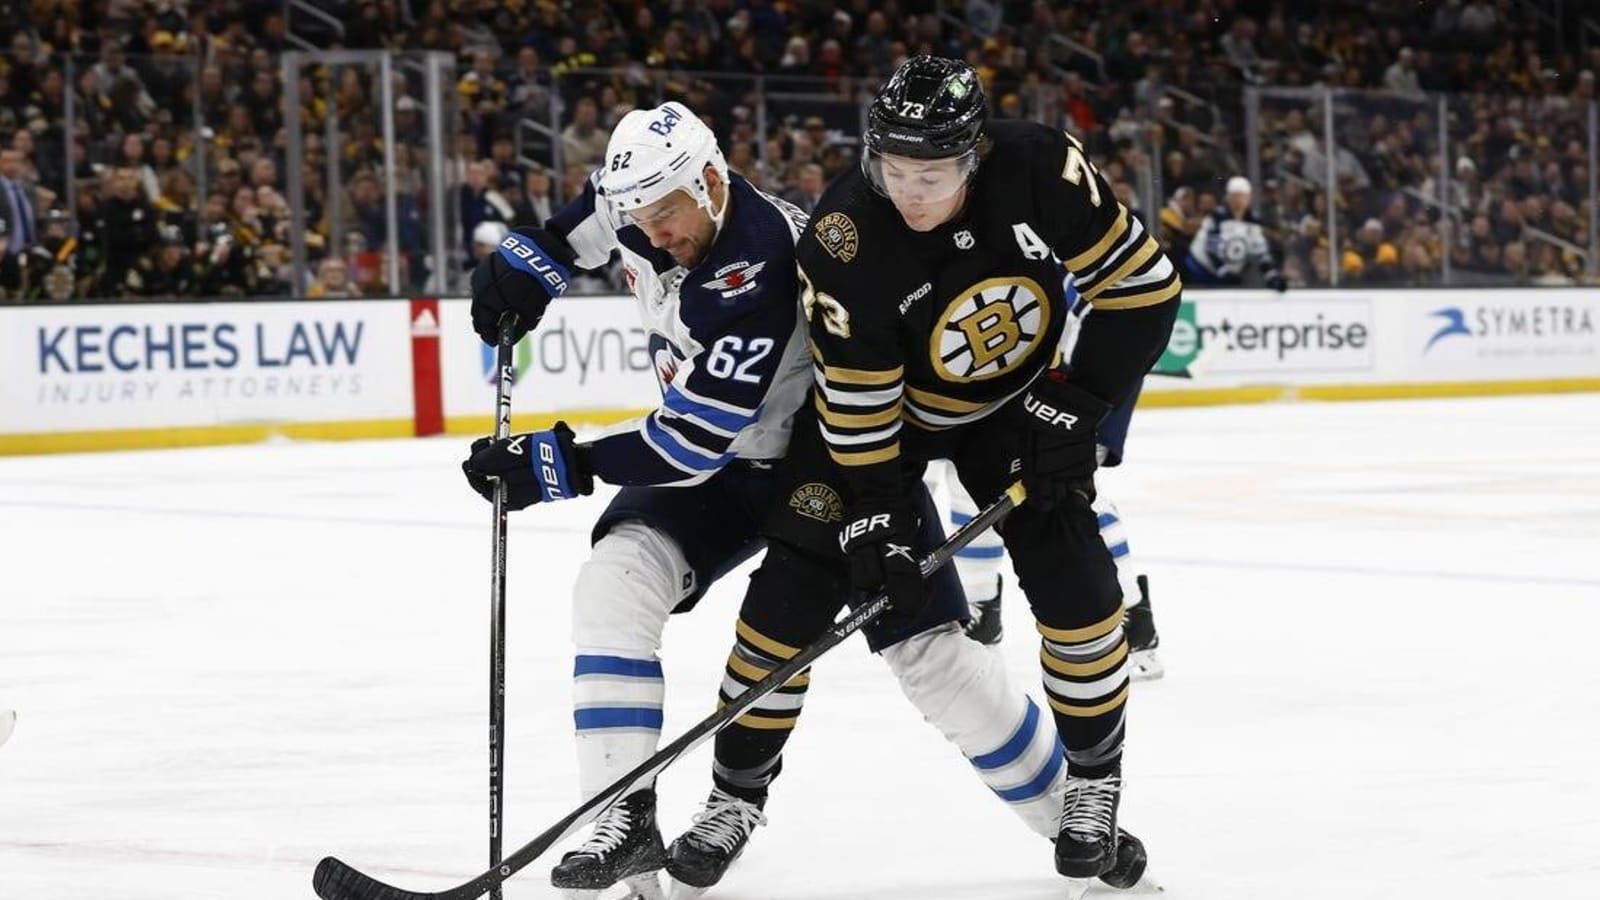 Streaking Bruins pull away for victory over Jets